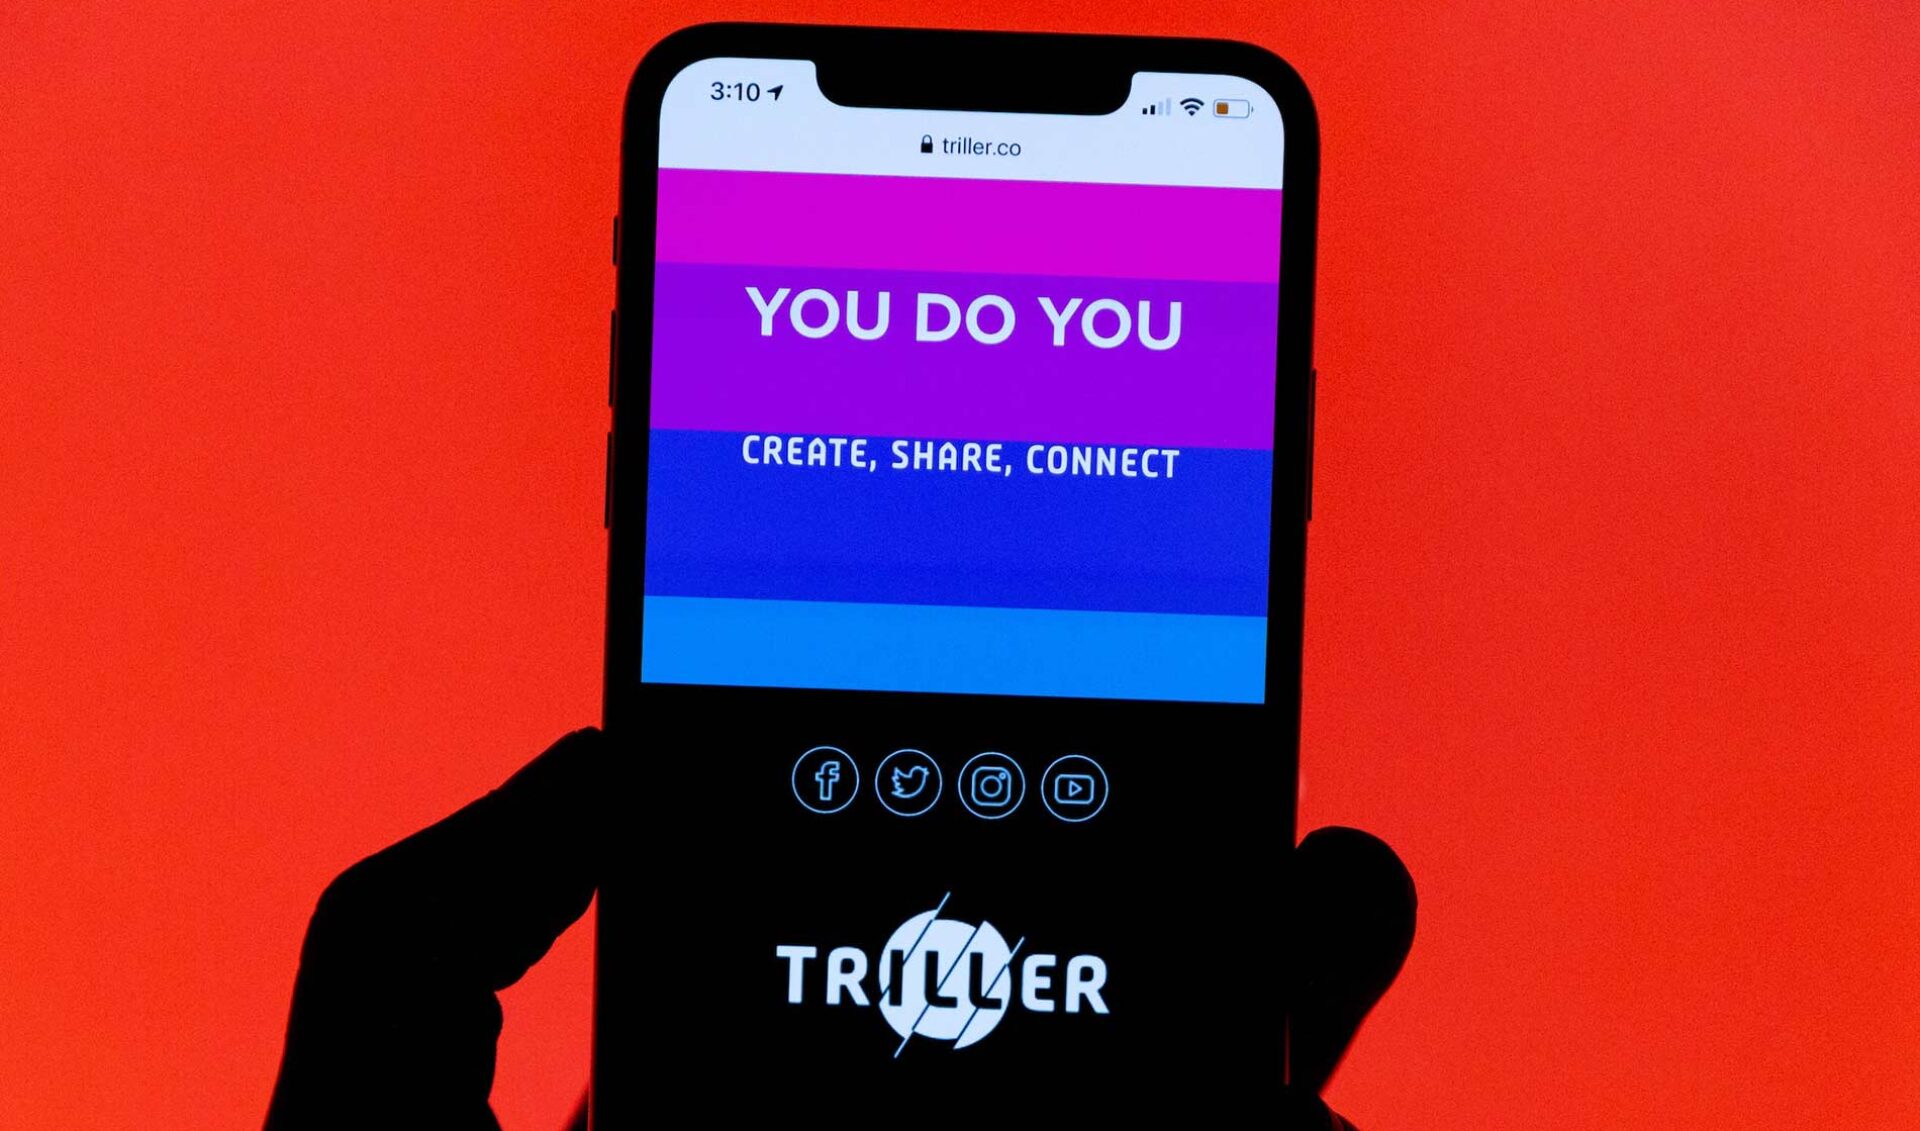 Triller claims to have 550 million user signups. Apptopia says it has 73 million.